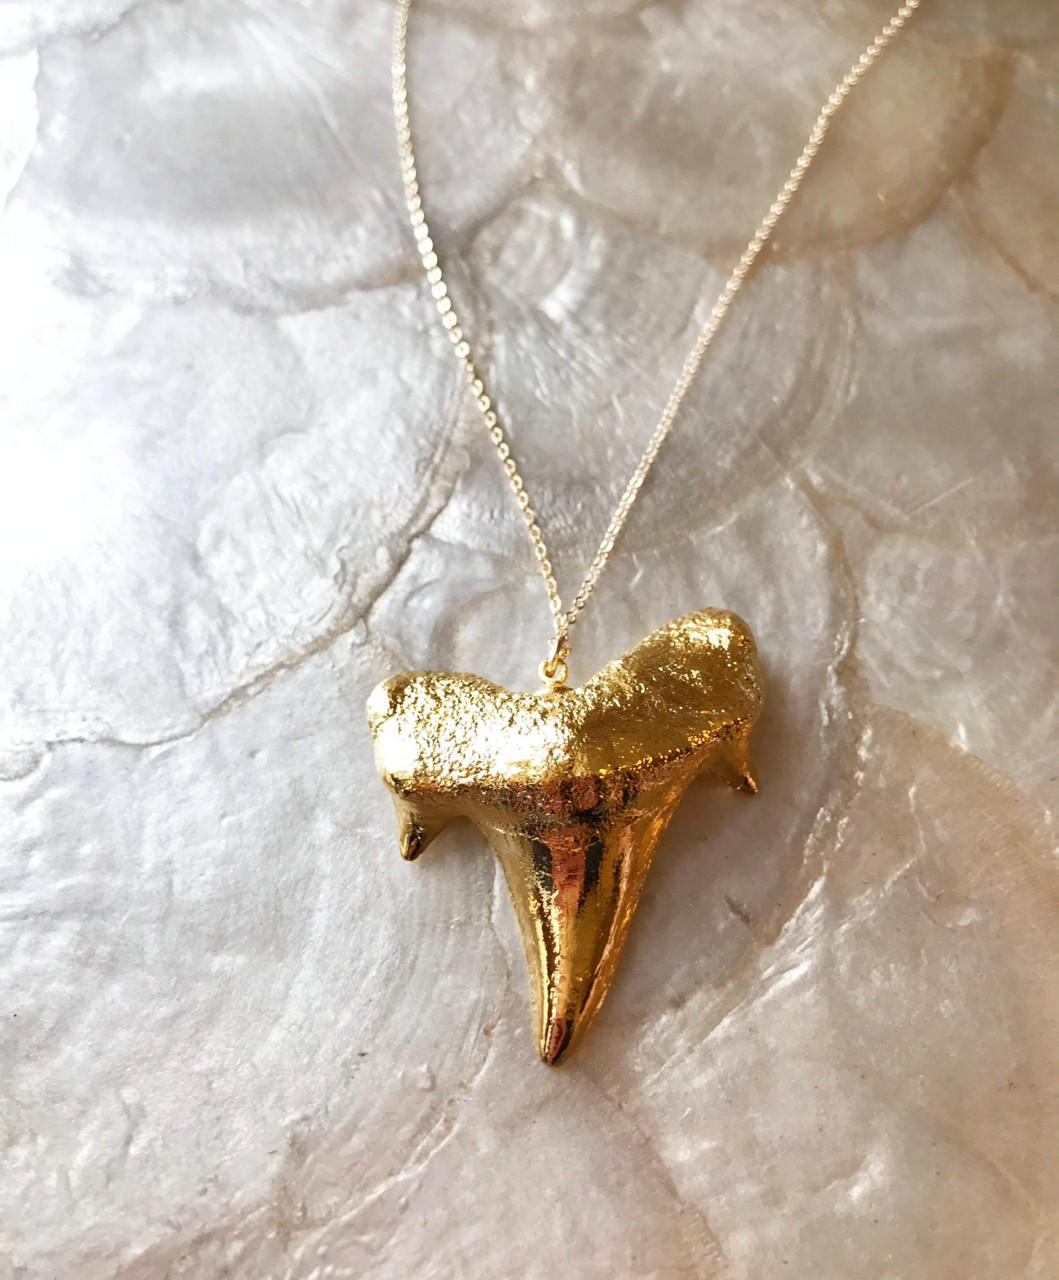 Shark Tooth Pendant Necklace for Men. Handmade in Sterling Silver. – EIJI